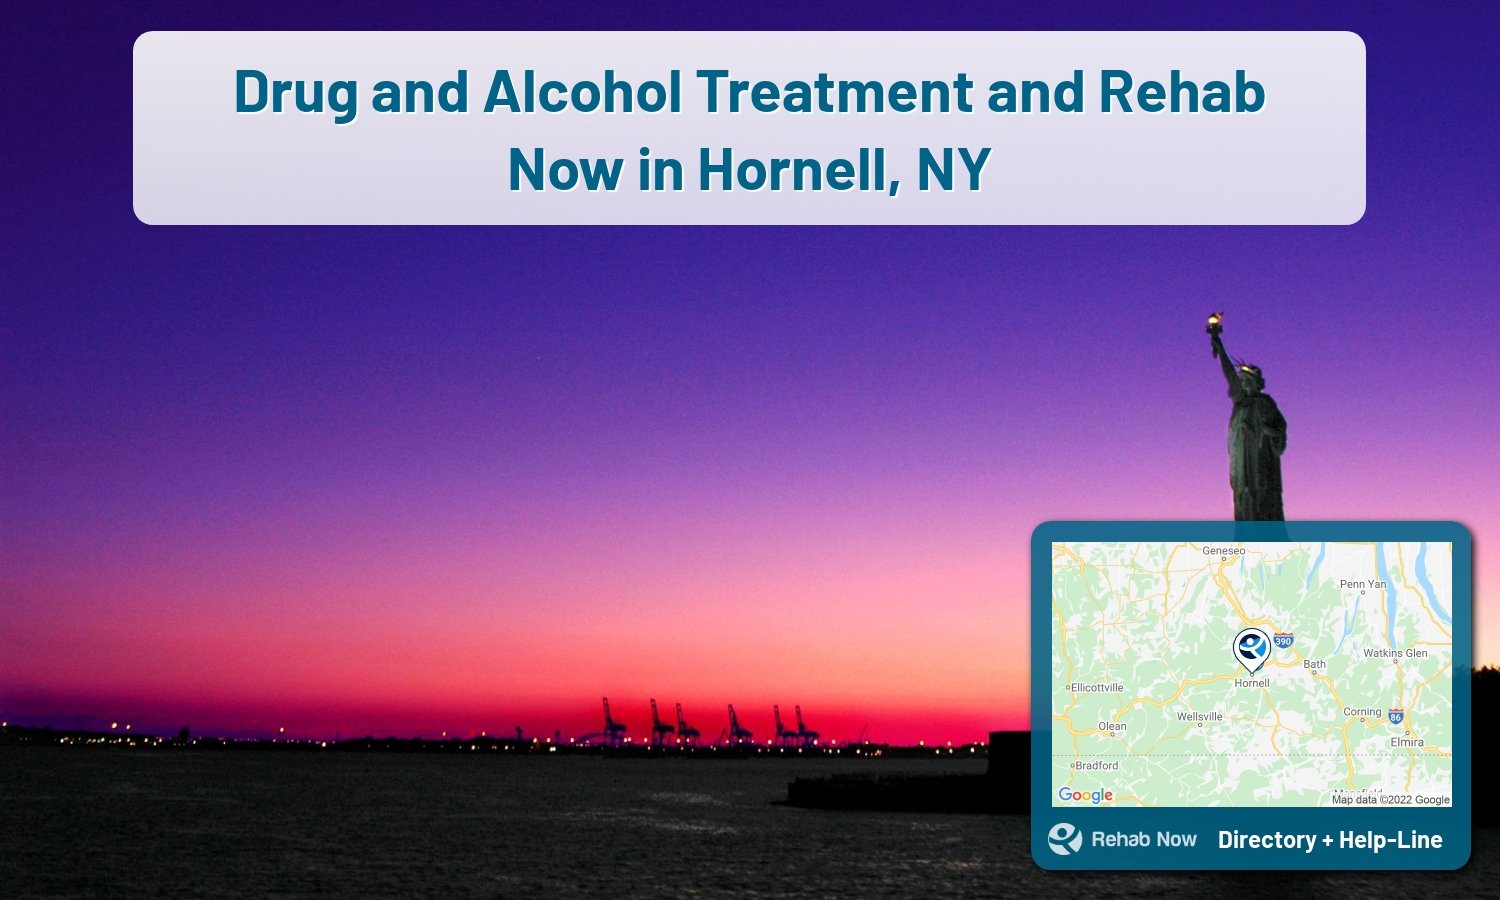 Those struggling with addiction can find help through addiction rehab facilities in Hornell, NY. Get help now!